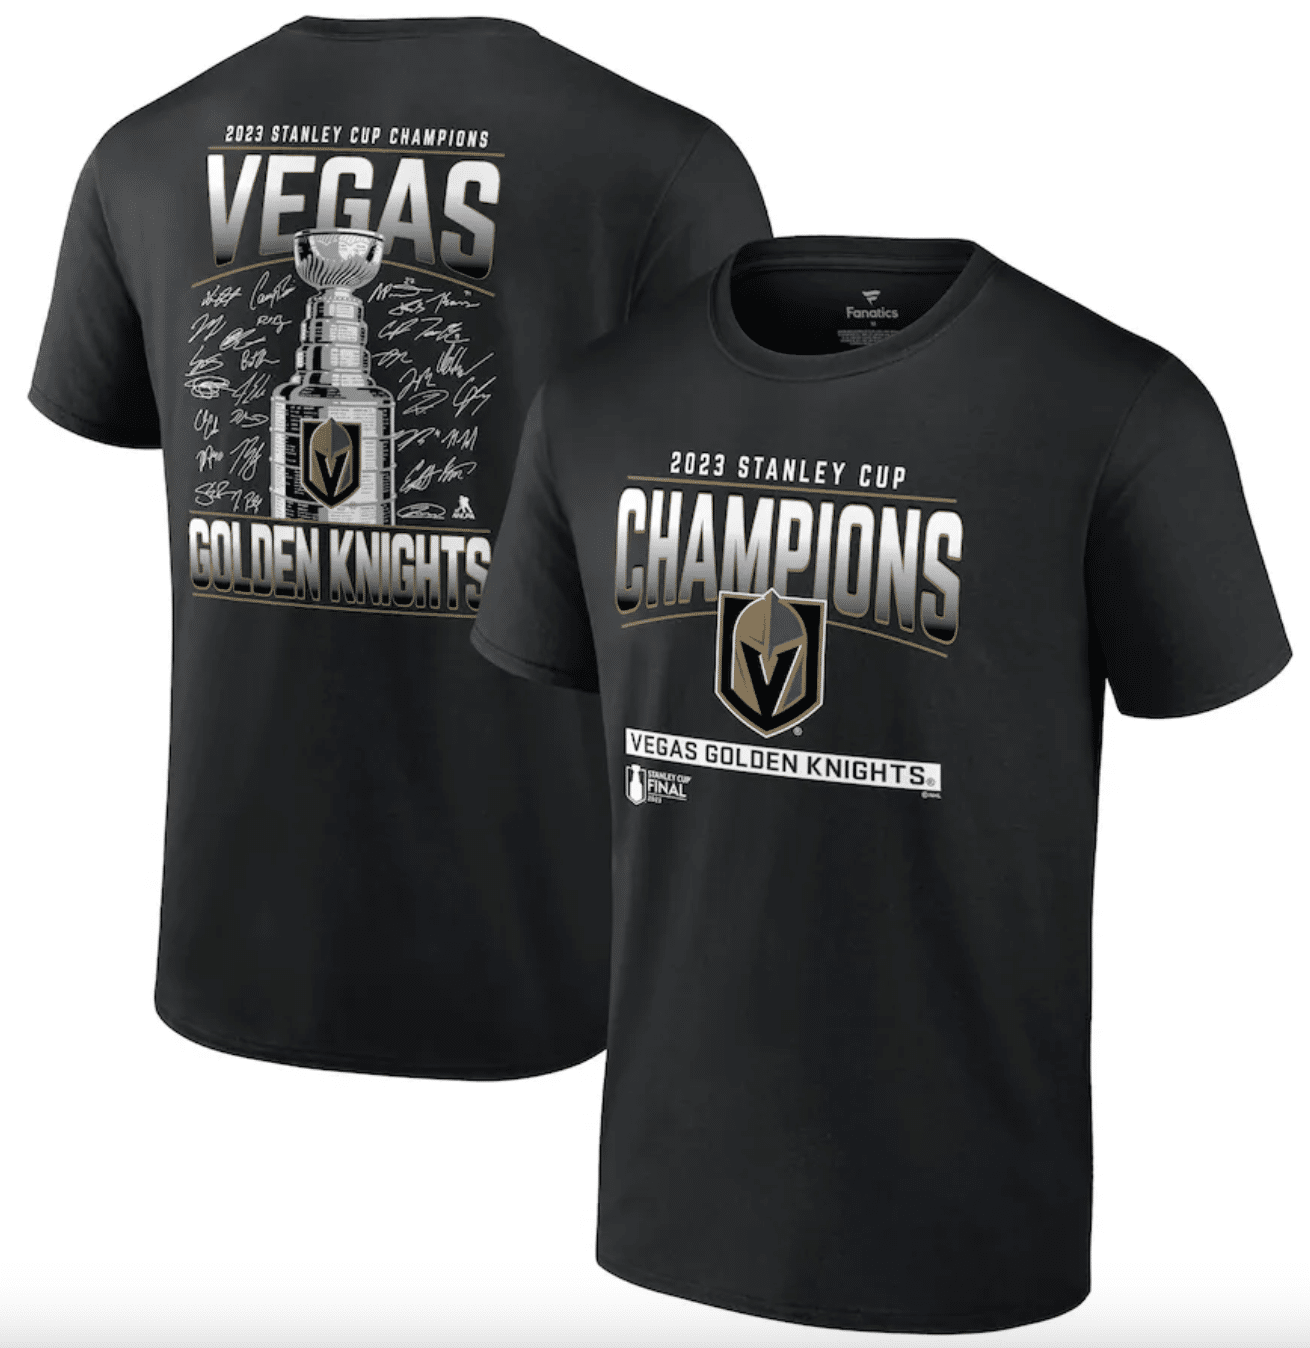 Vegas Golden Knights 2023 Stanley Cup Champions Signature Roster T-Shirt – Black